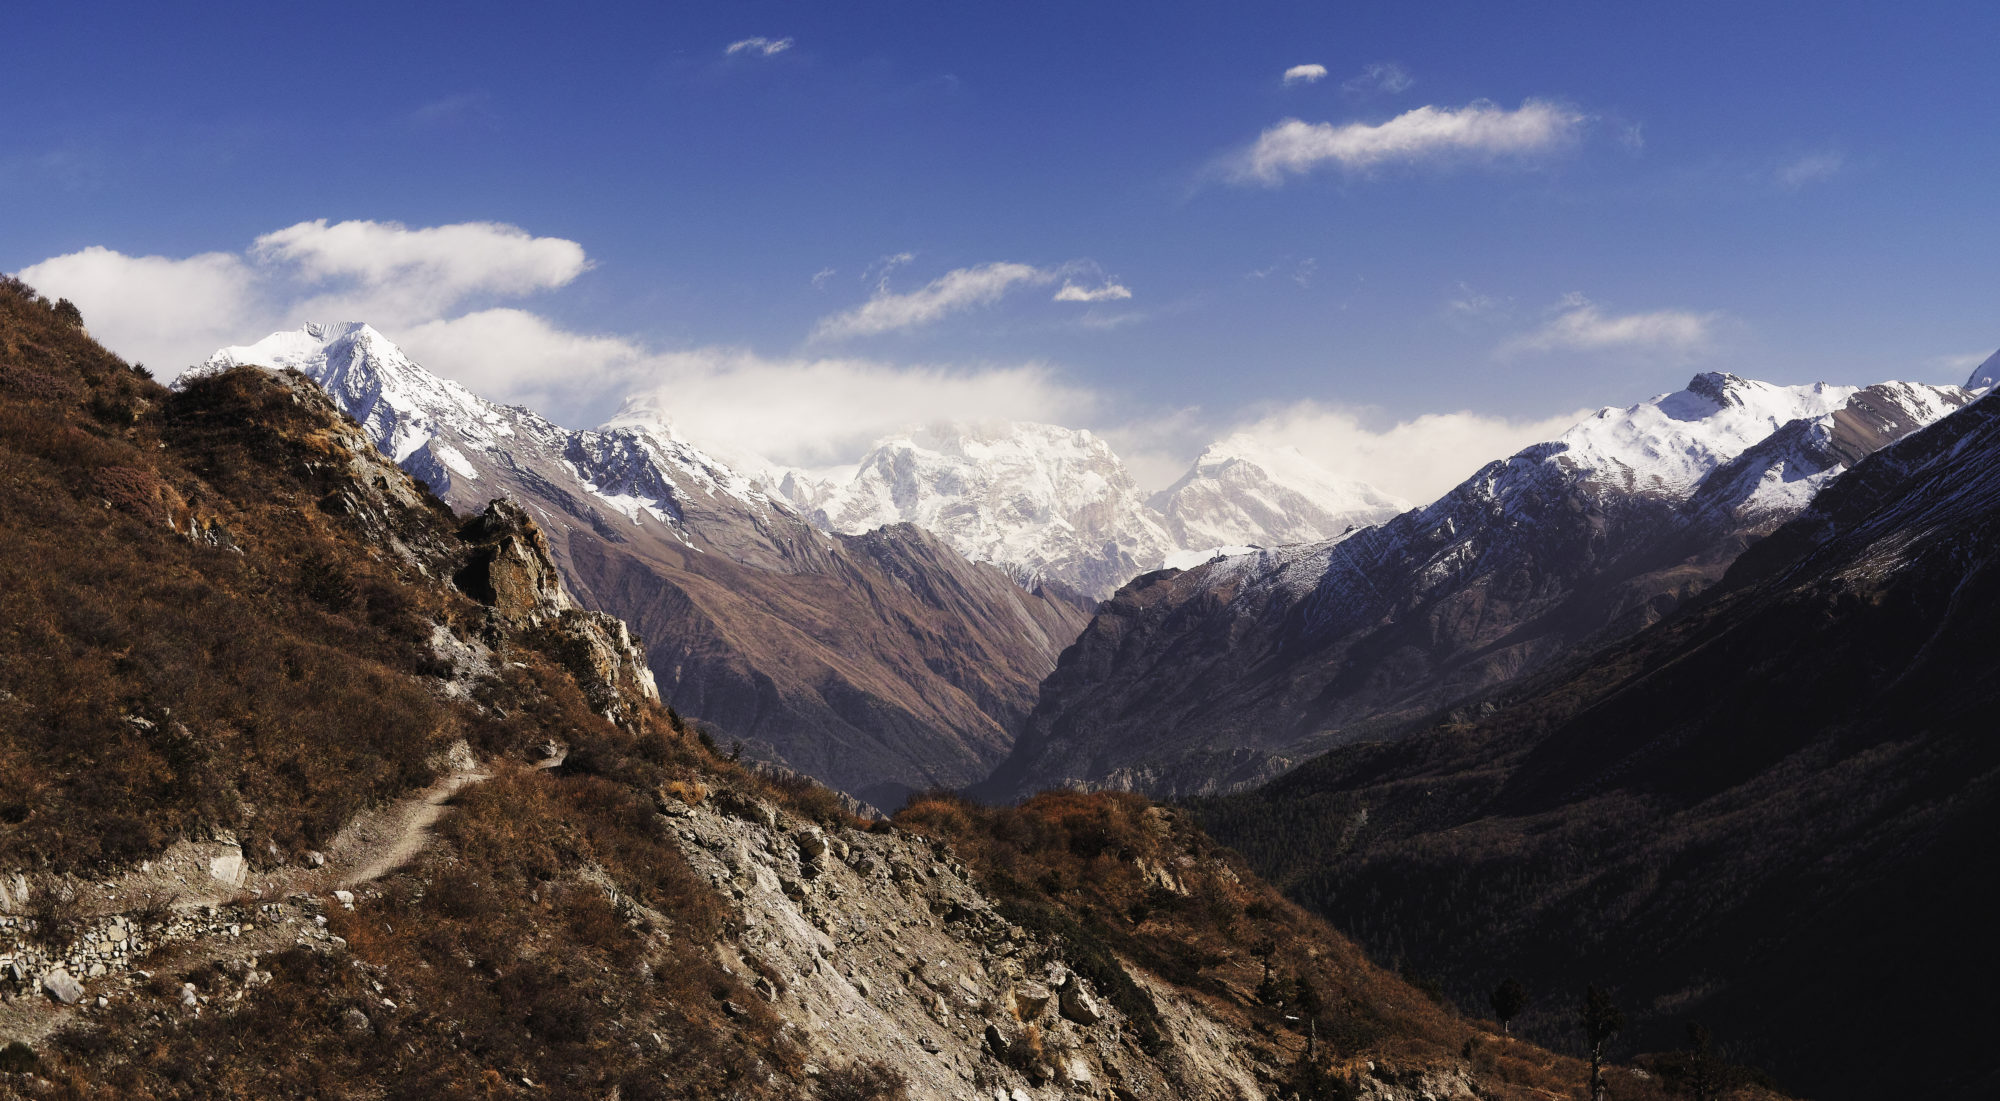 The Annapurna massif includes one of the few 8000 metre peaks in the world. Photo: S. Choi/Flickr